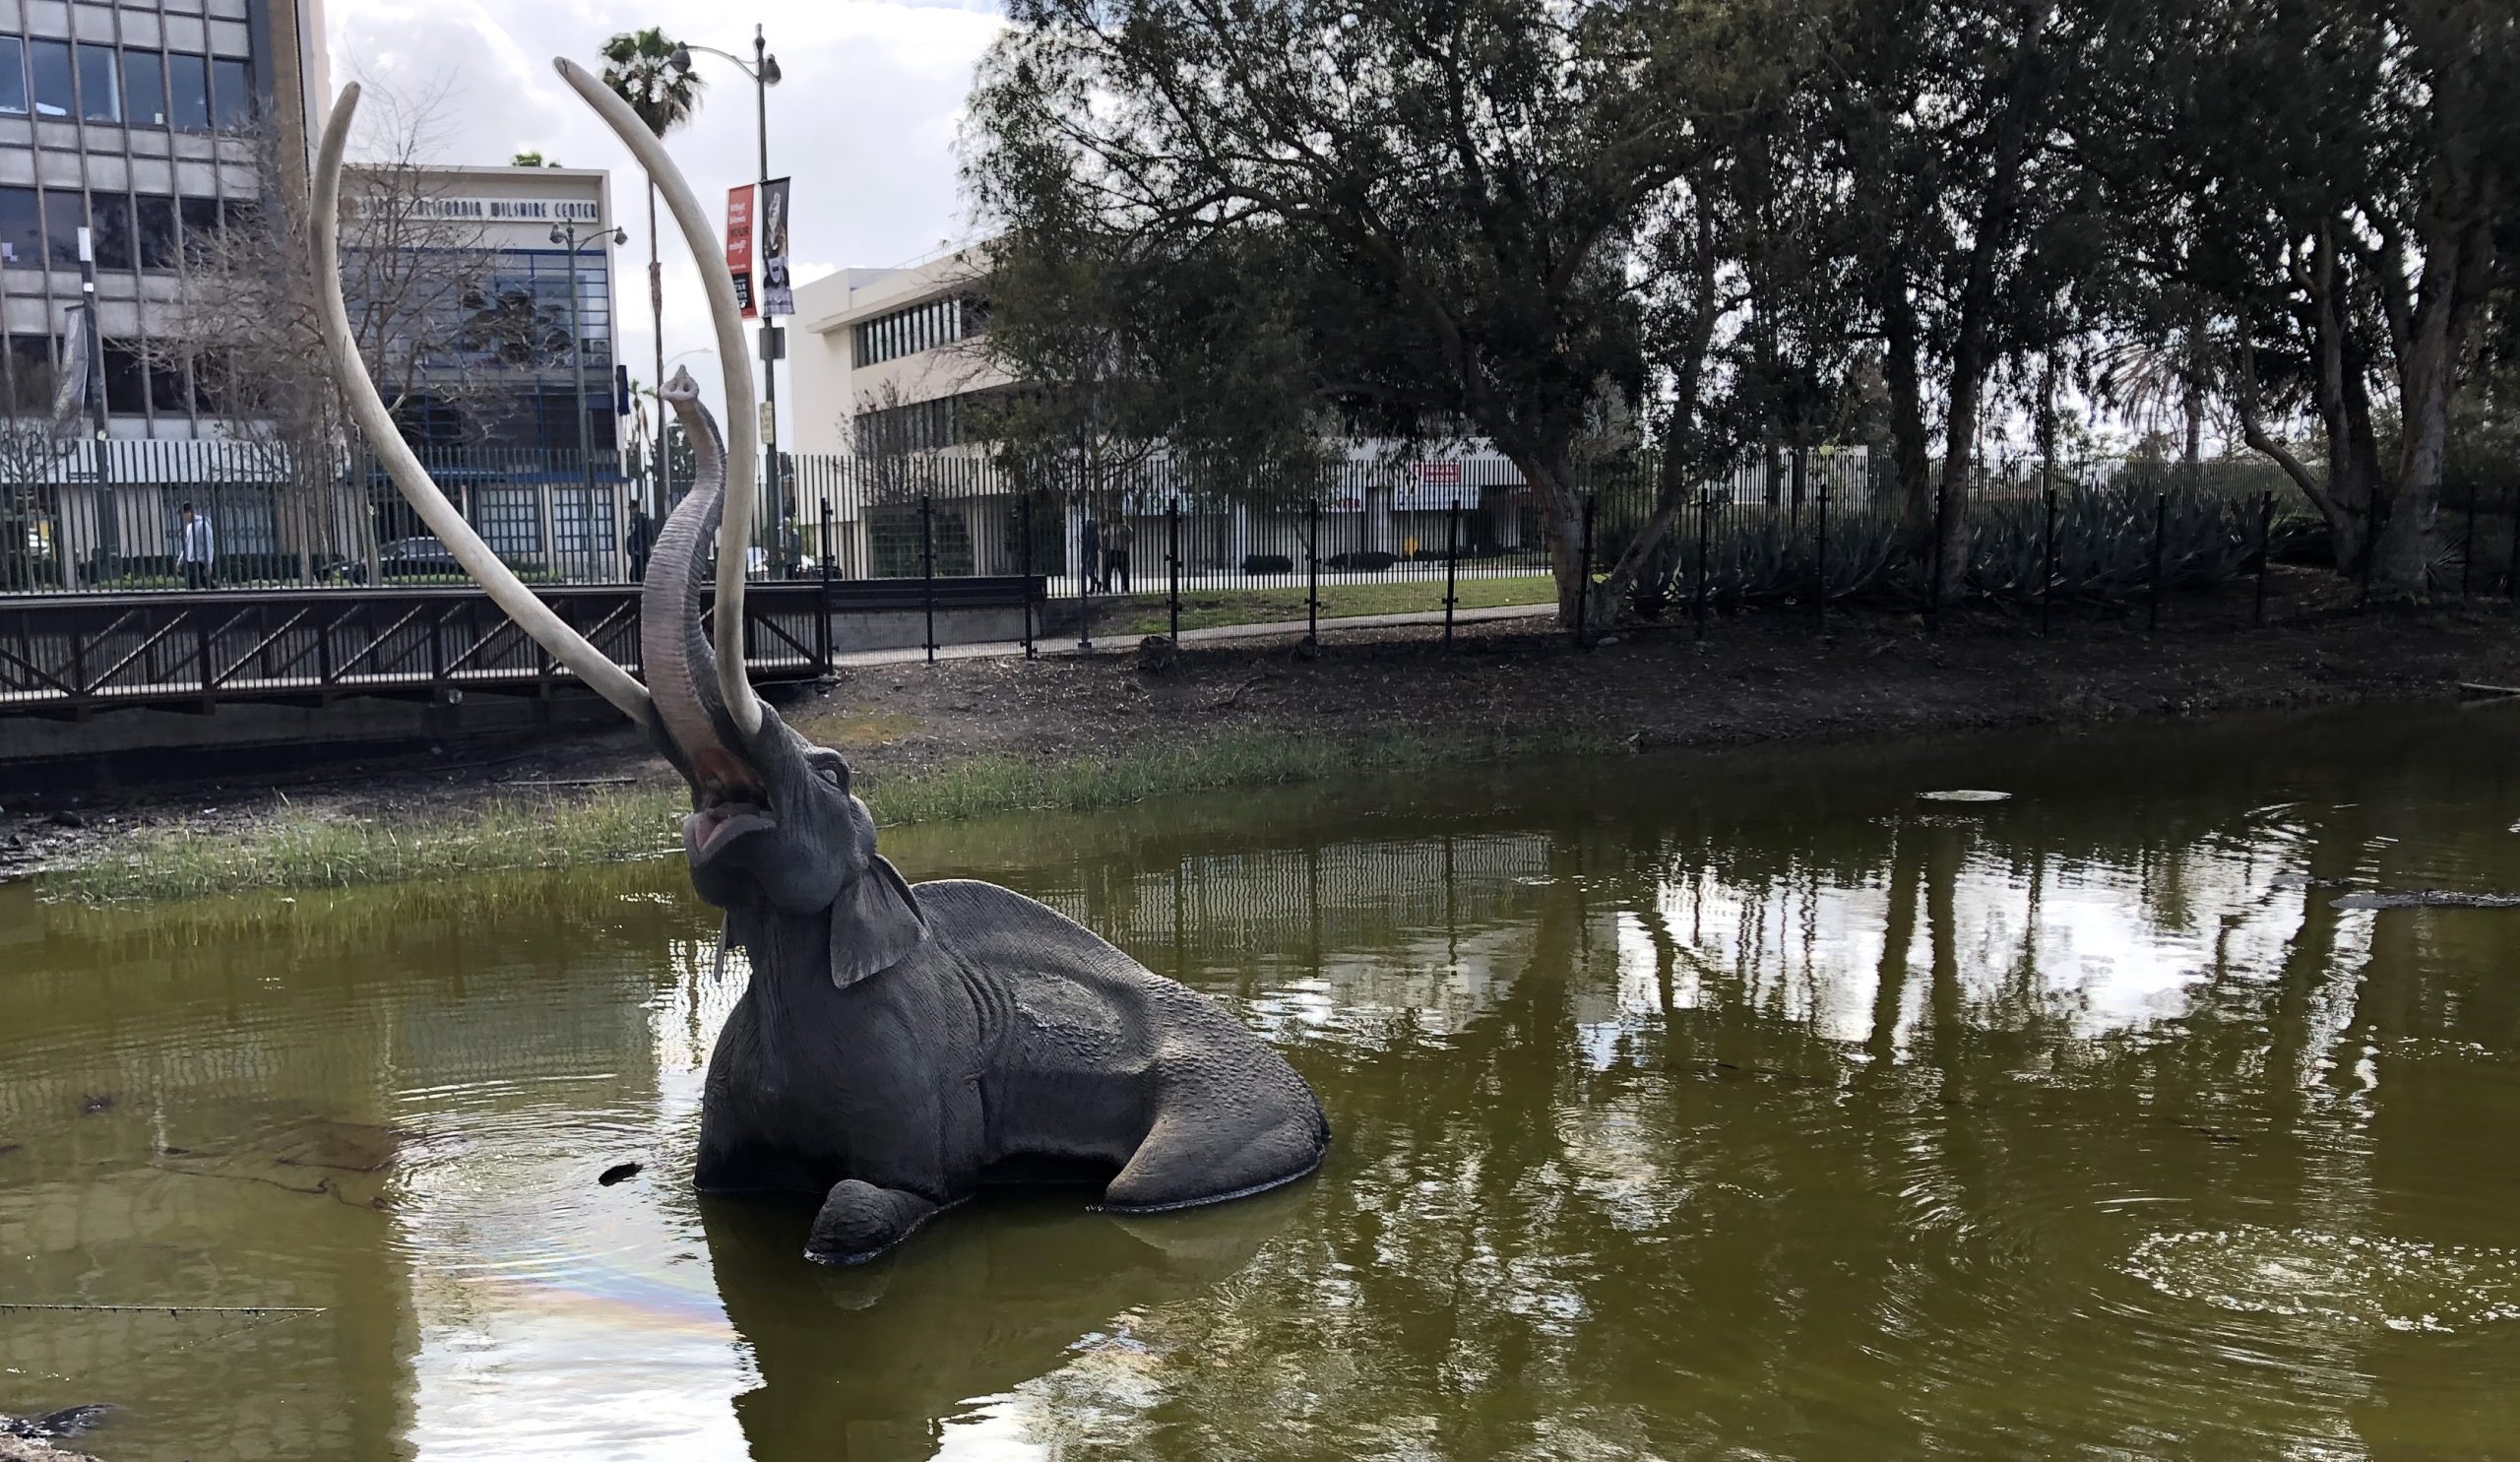 a photo of an artificial ancient mammoth half-submerged in the watery tar of La Brea (also known as the the tar pits tar pits). Its sculpted cry of anguish is apparent even in suspended animation. past the weirdly tranquil scene into the background are modern-day buildings, a streetlight, and a palm tree.